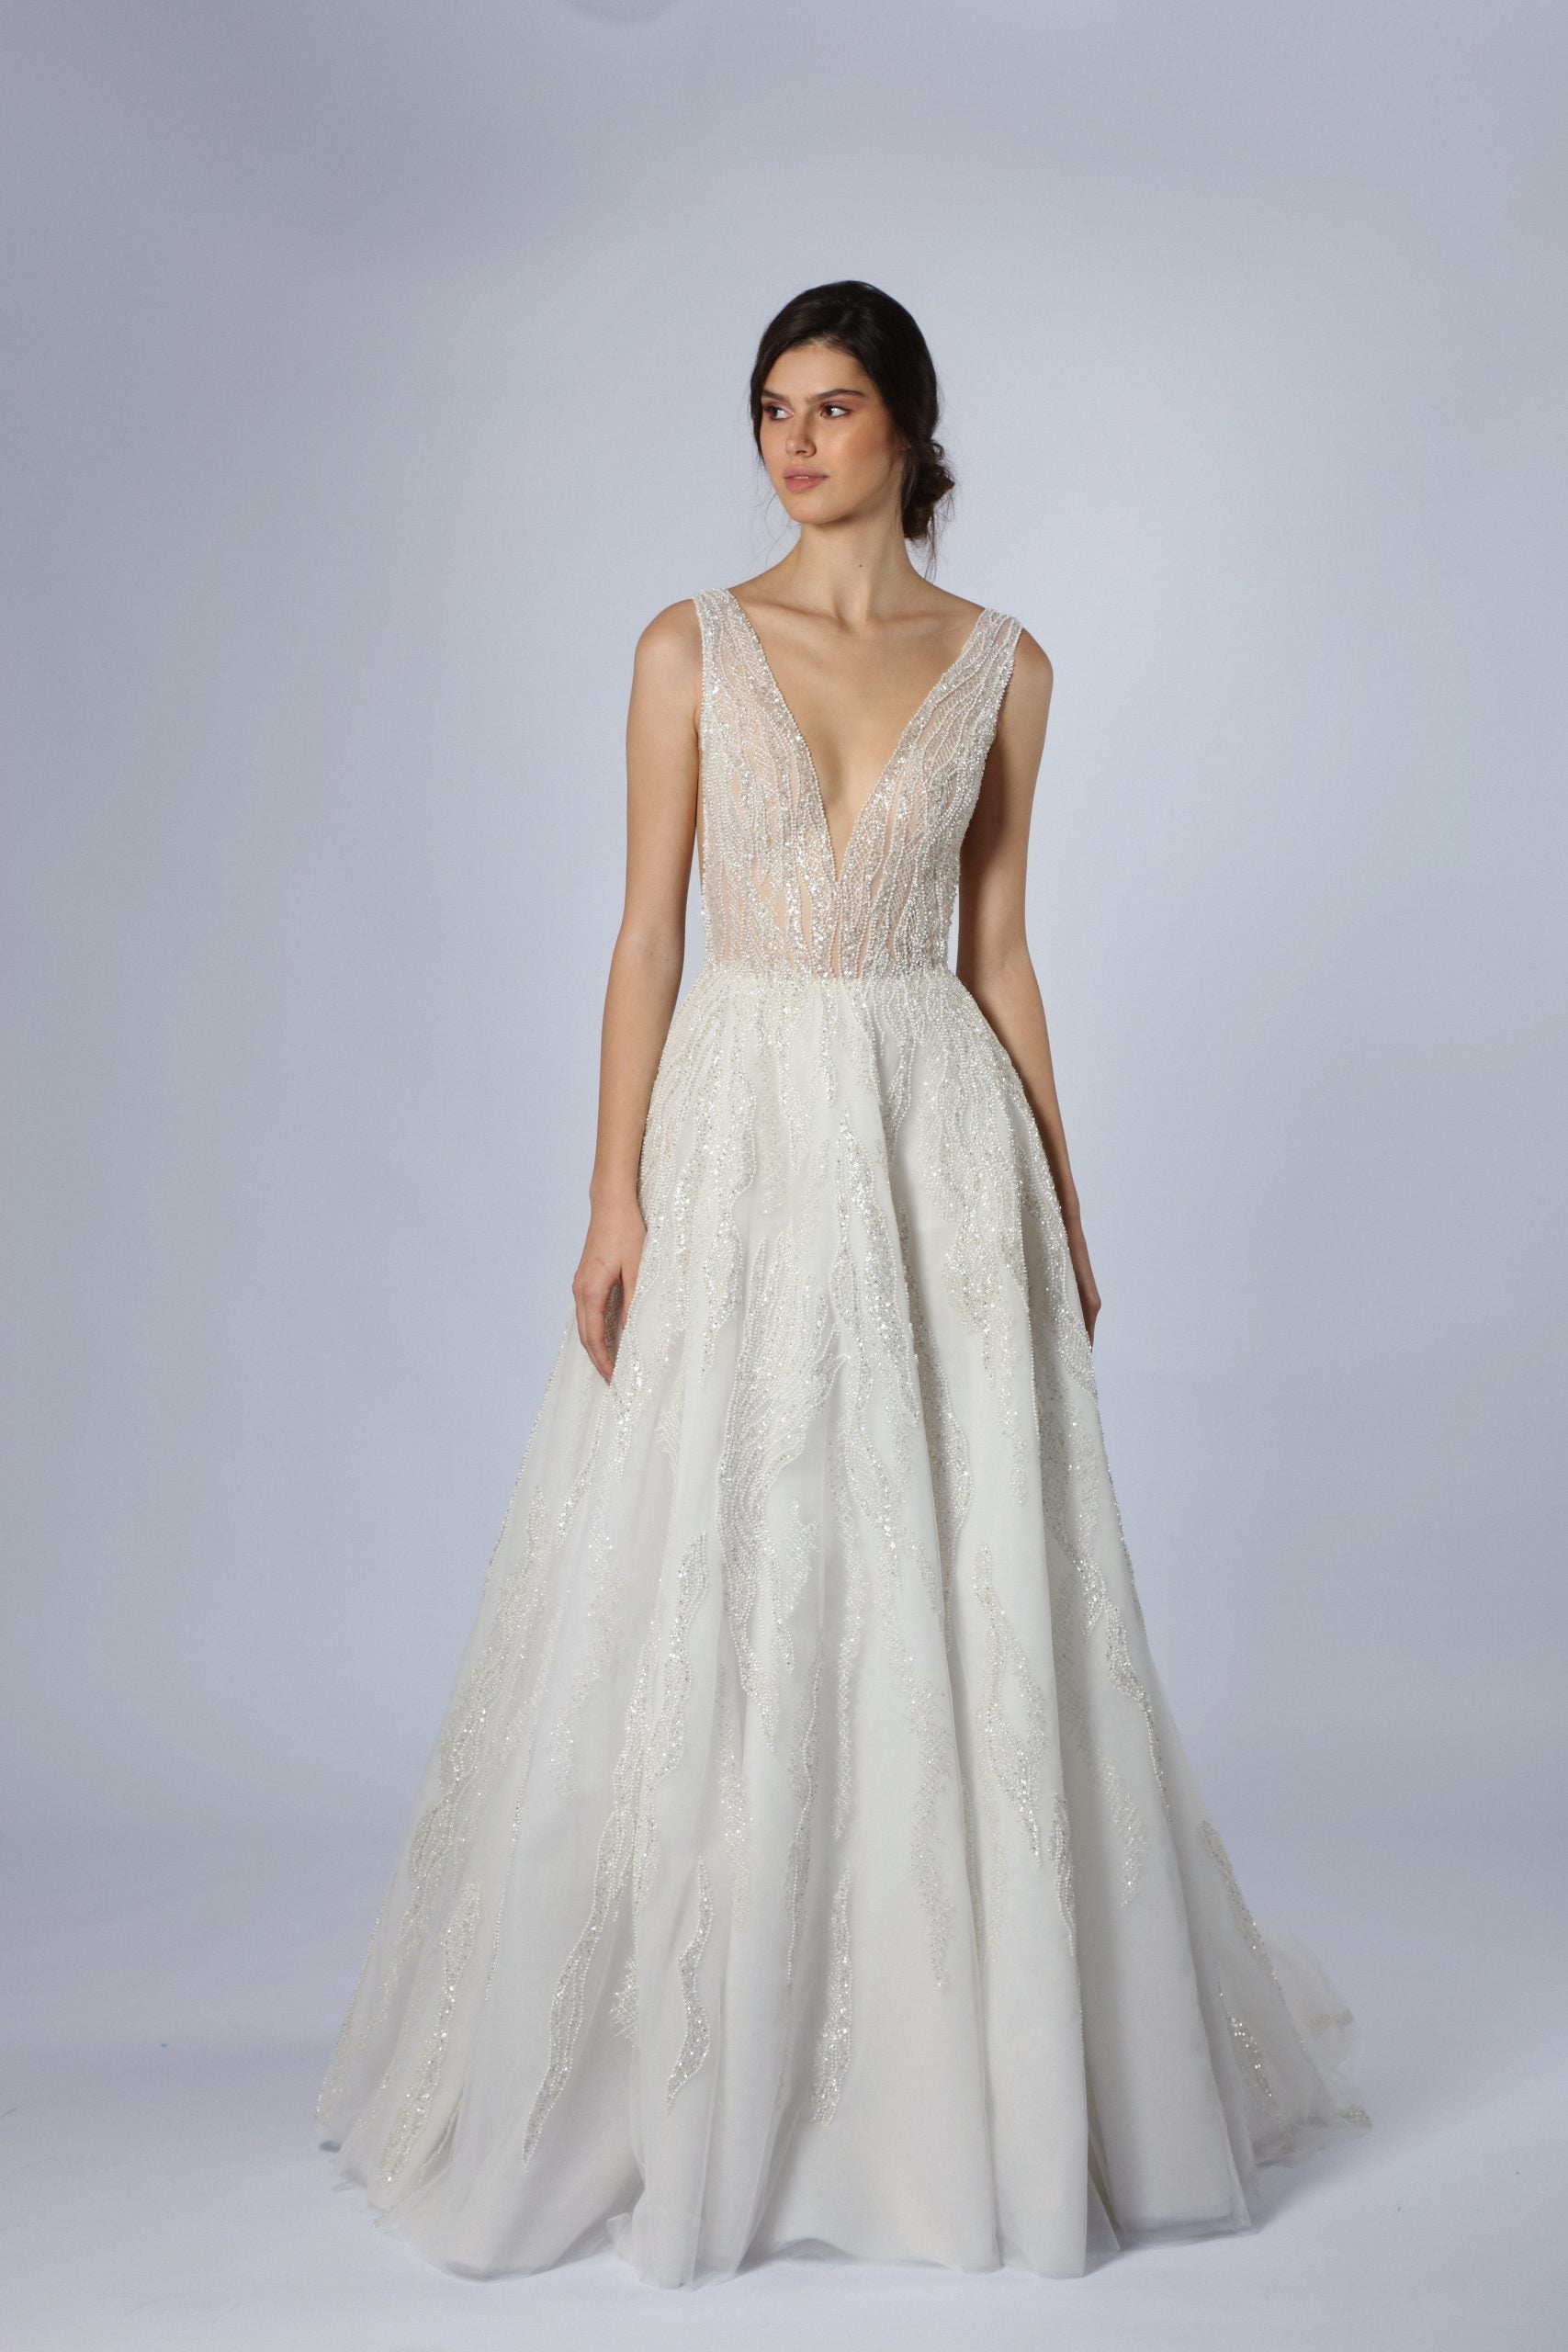 Embellished V-Neck A-Line Gown by Tony Ward - Image 1